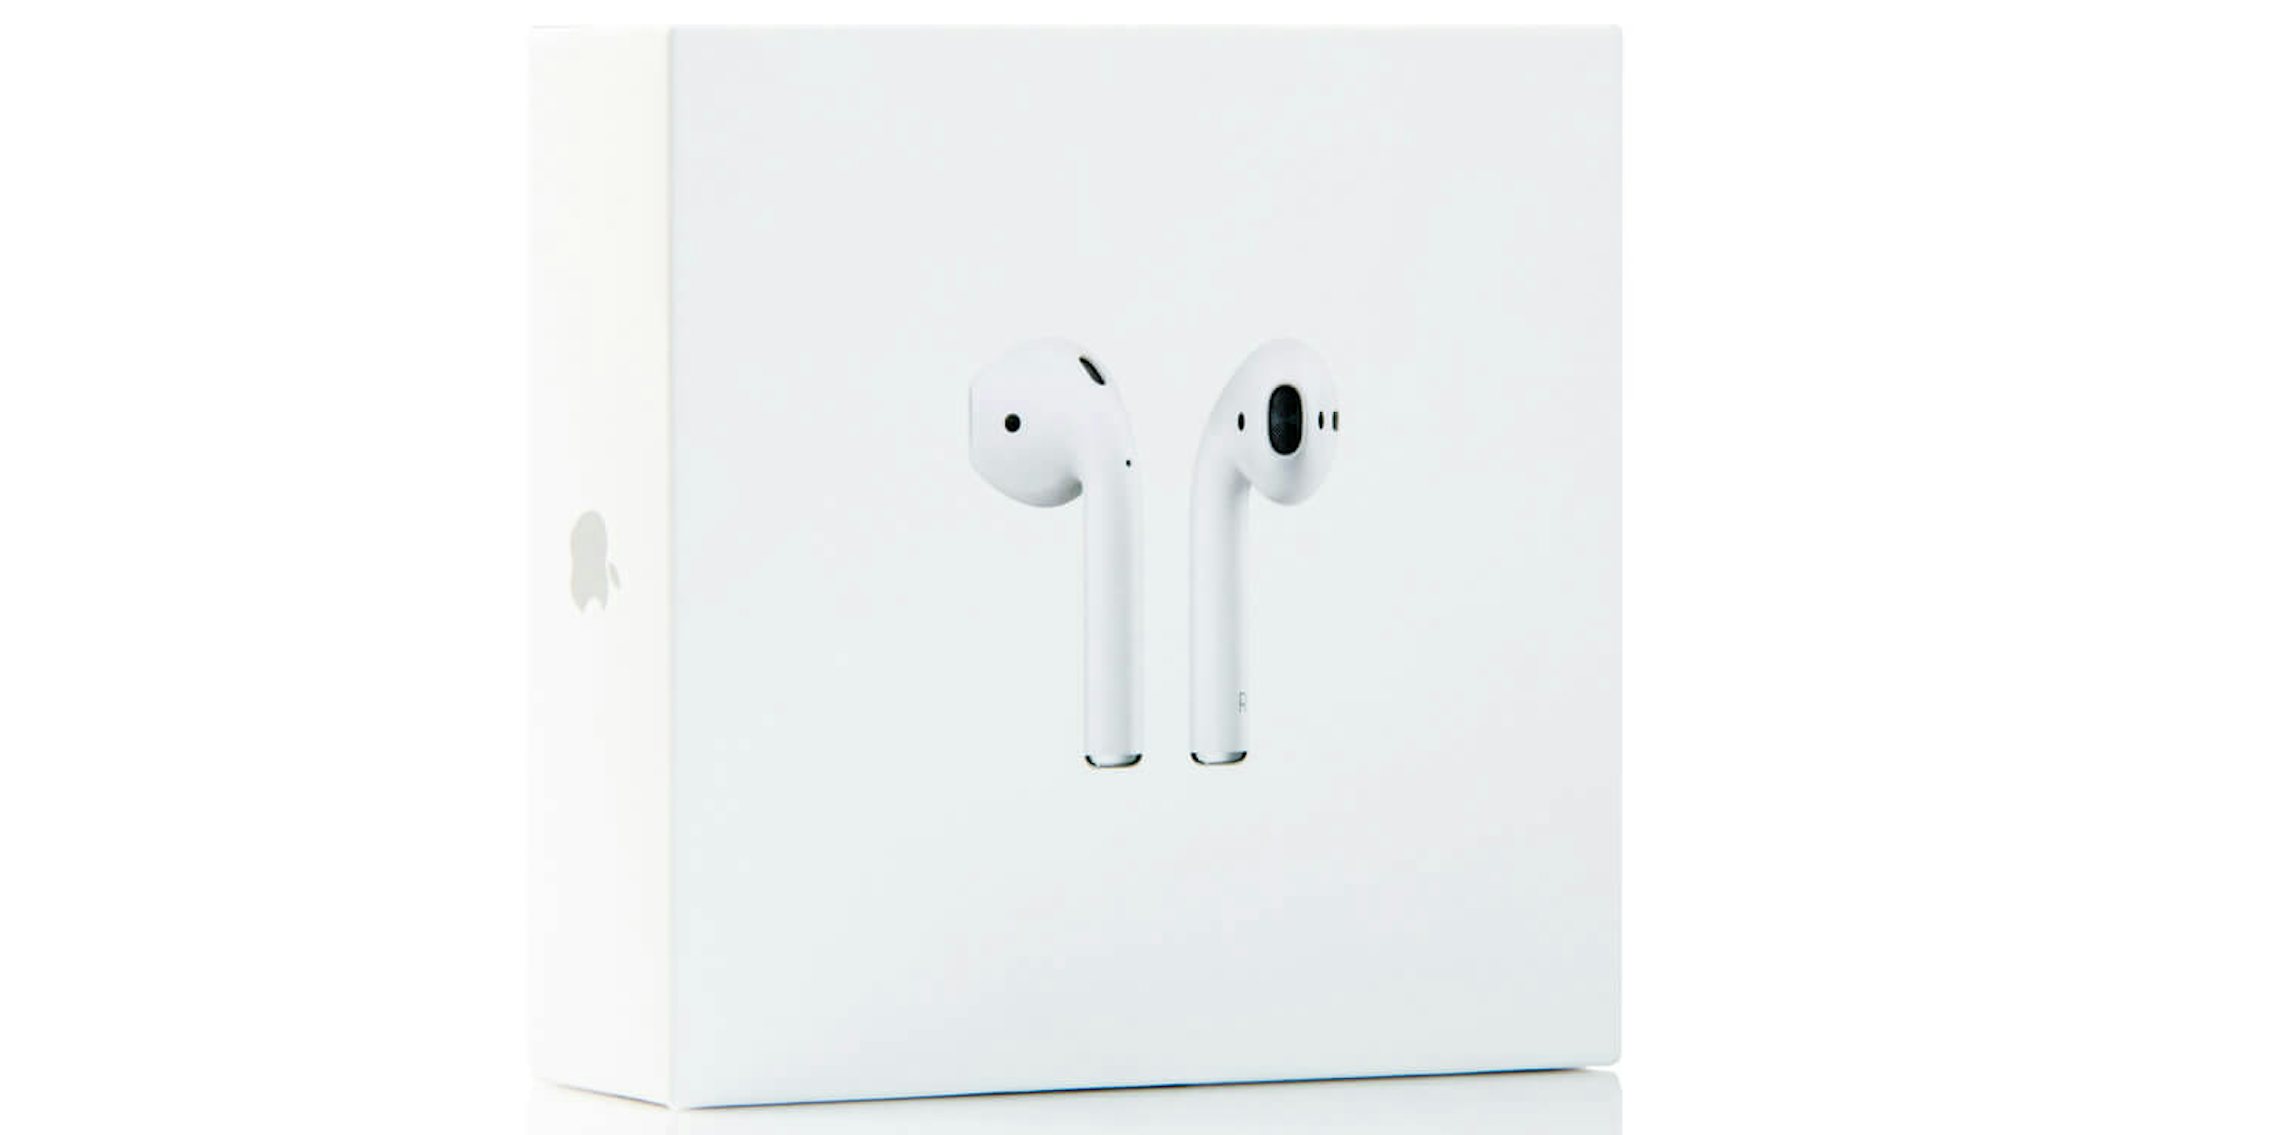 airpods black friday